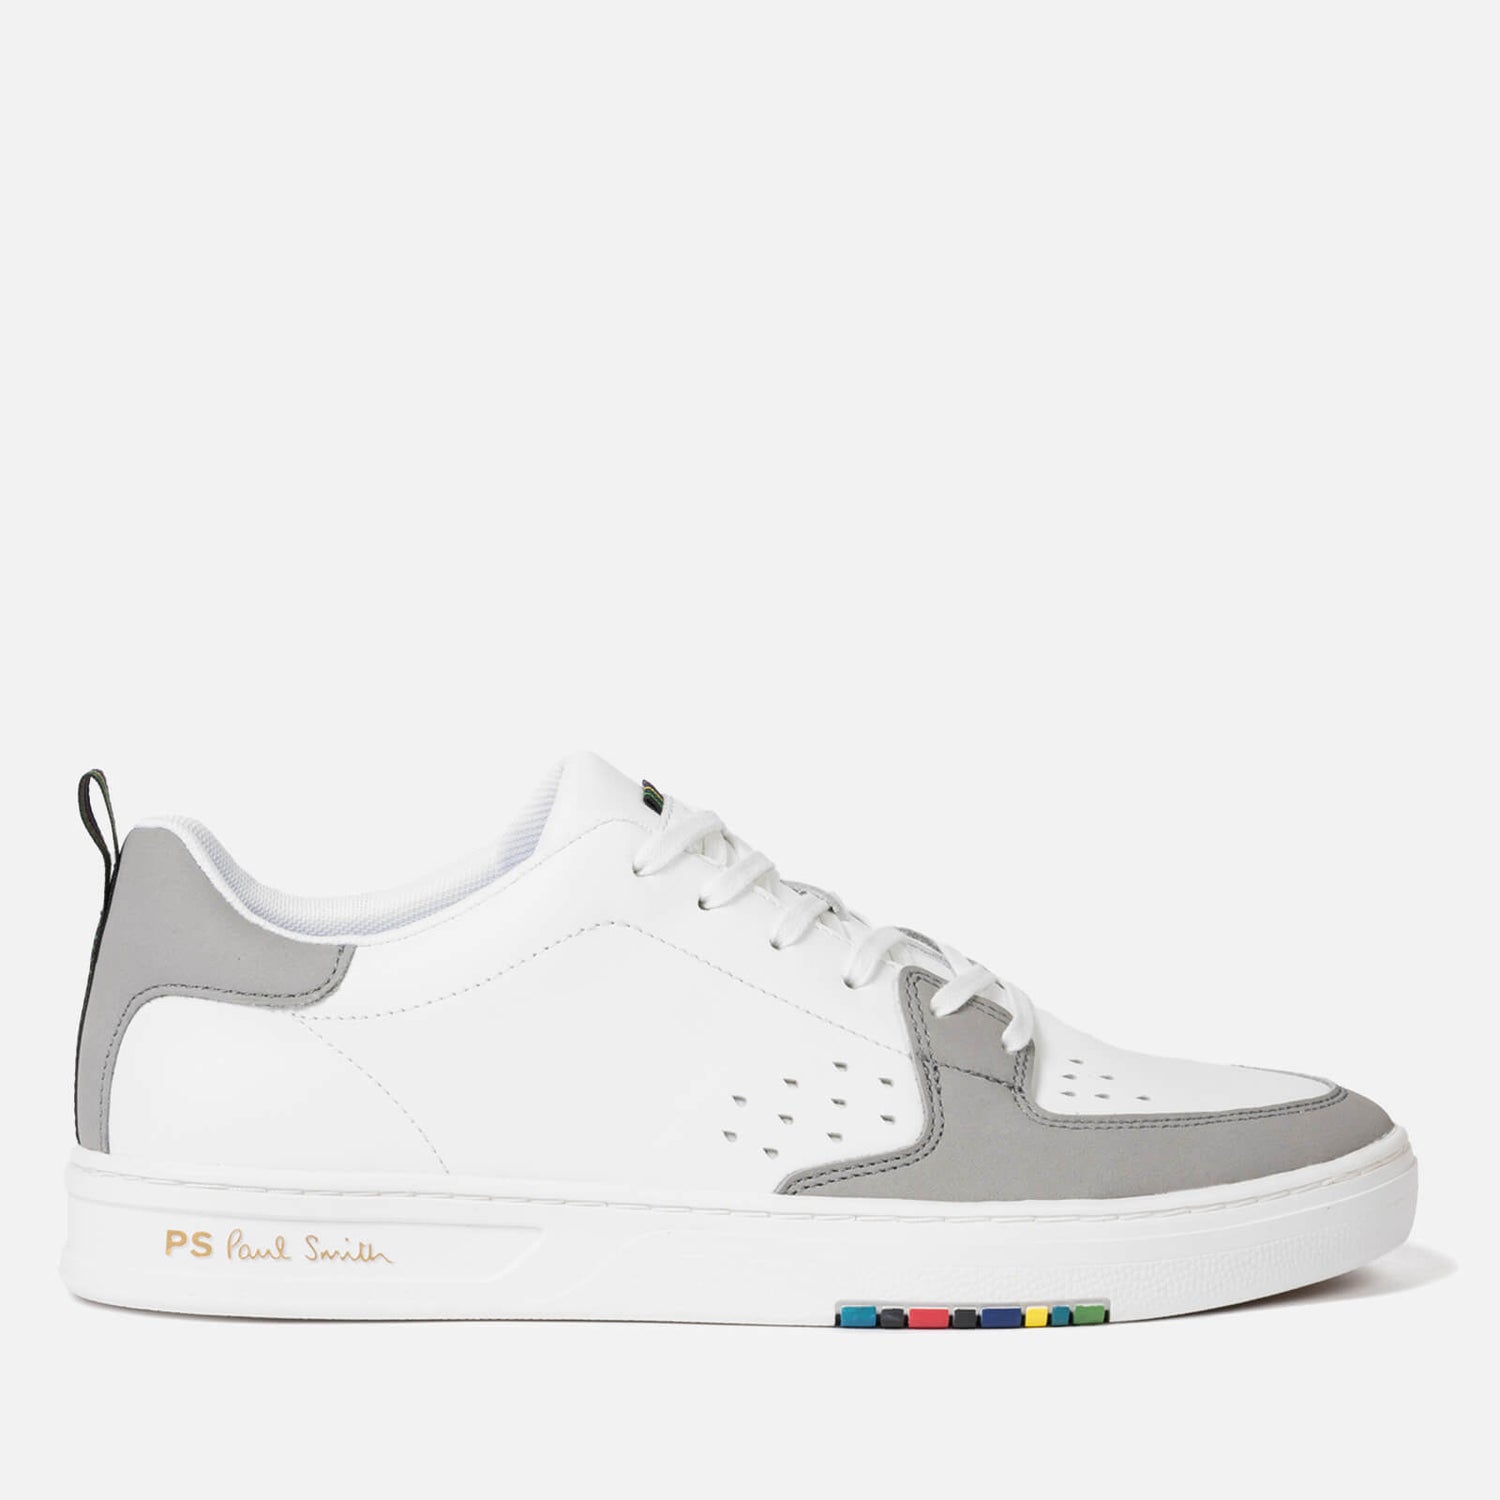 PS Paul Smith Men's Cosmo Leather Basket Trainers - UK 7